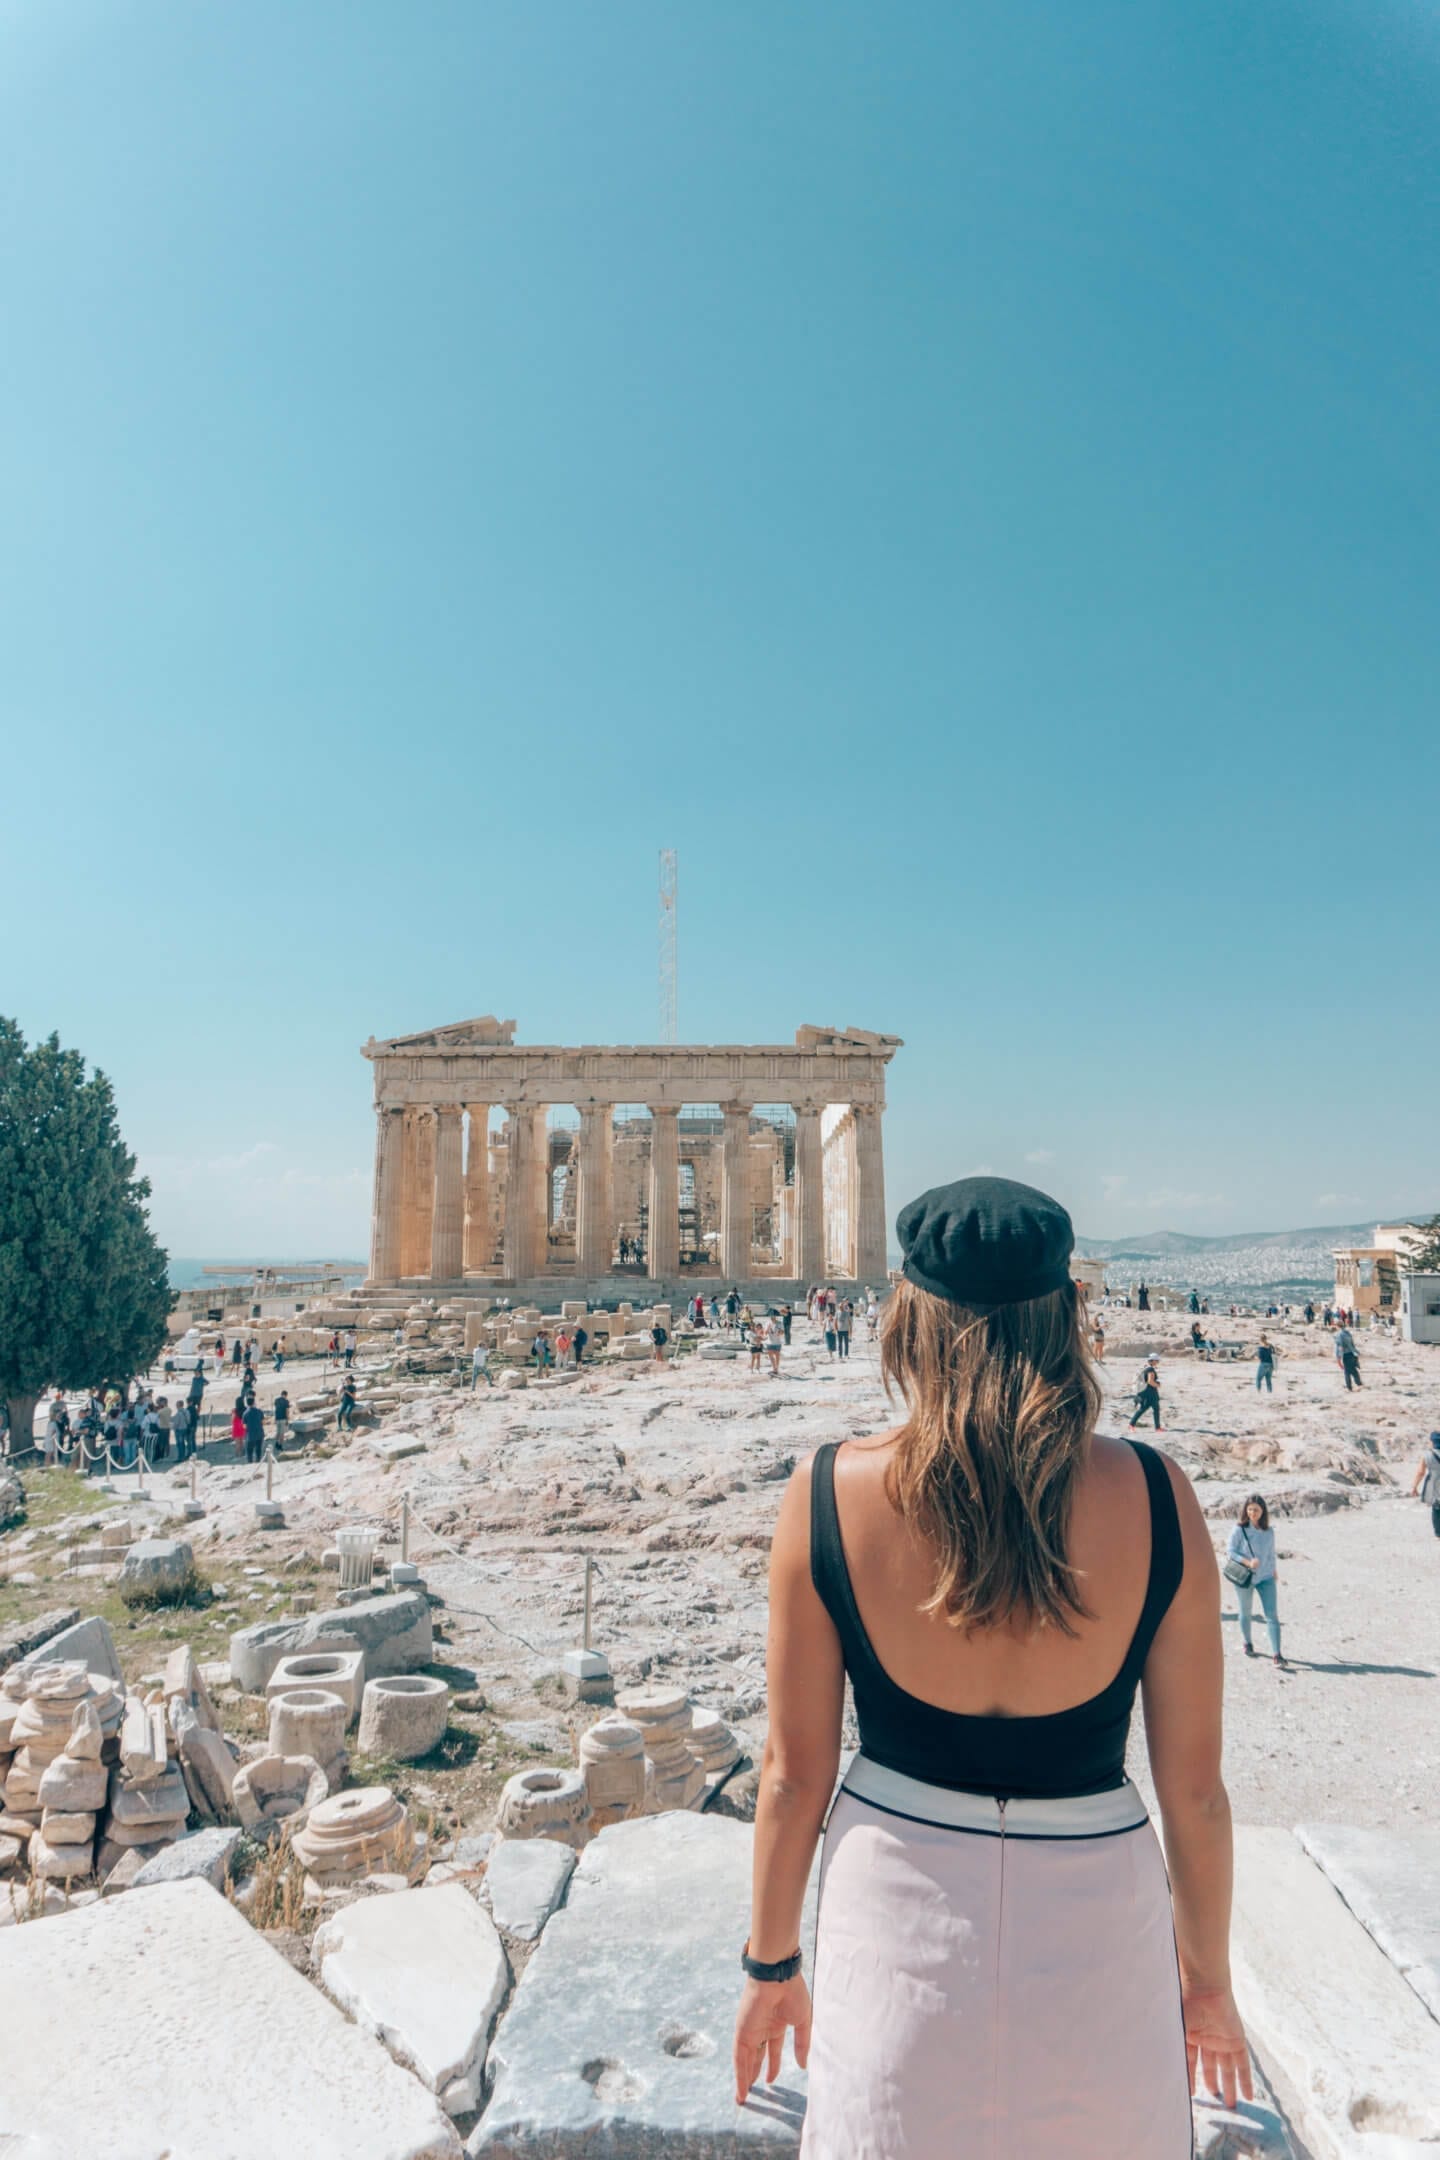 A must-see on your 10 days in Greece itinerary is the Acropolis in Athens. A girl looks at the Parthenon with her back towards us.